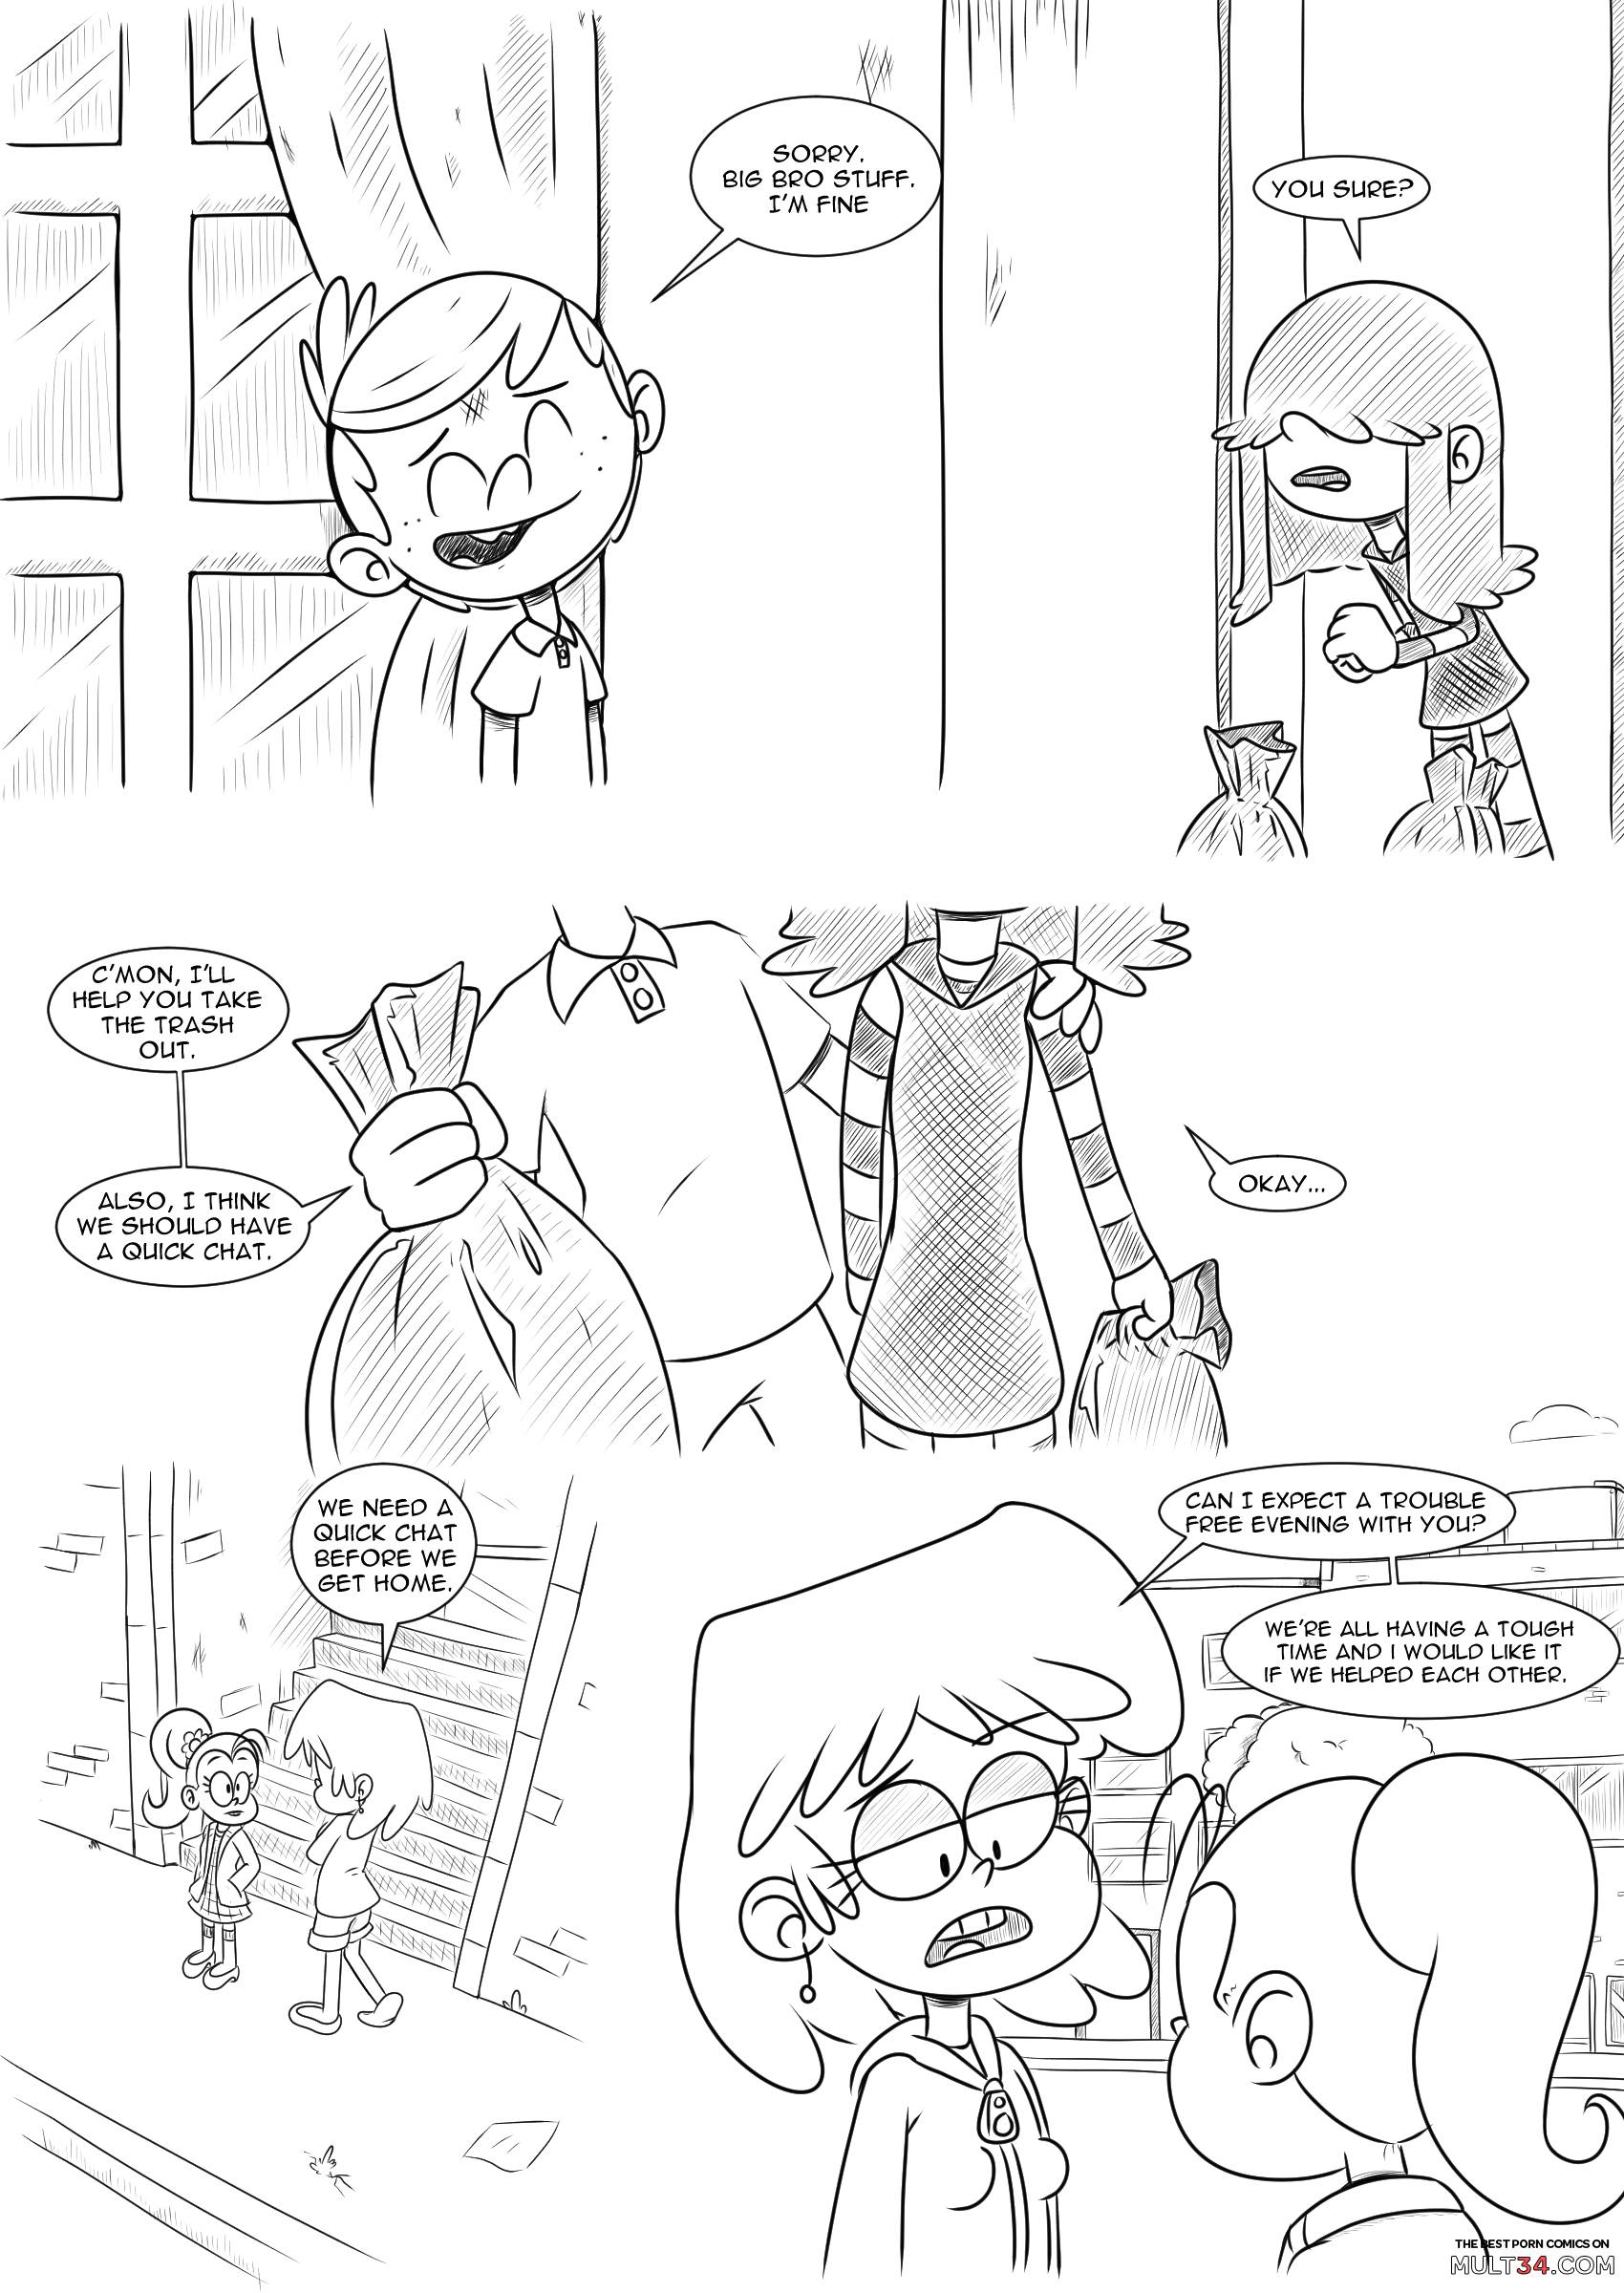 The loud house comic, chapter 4 page 5